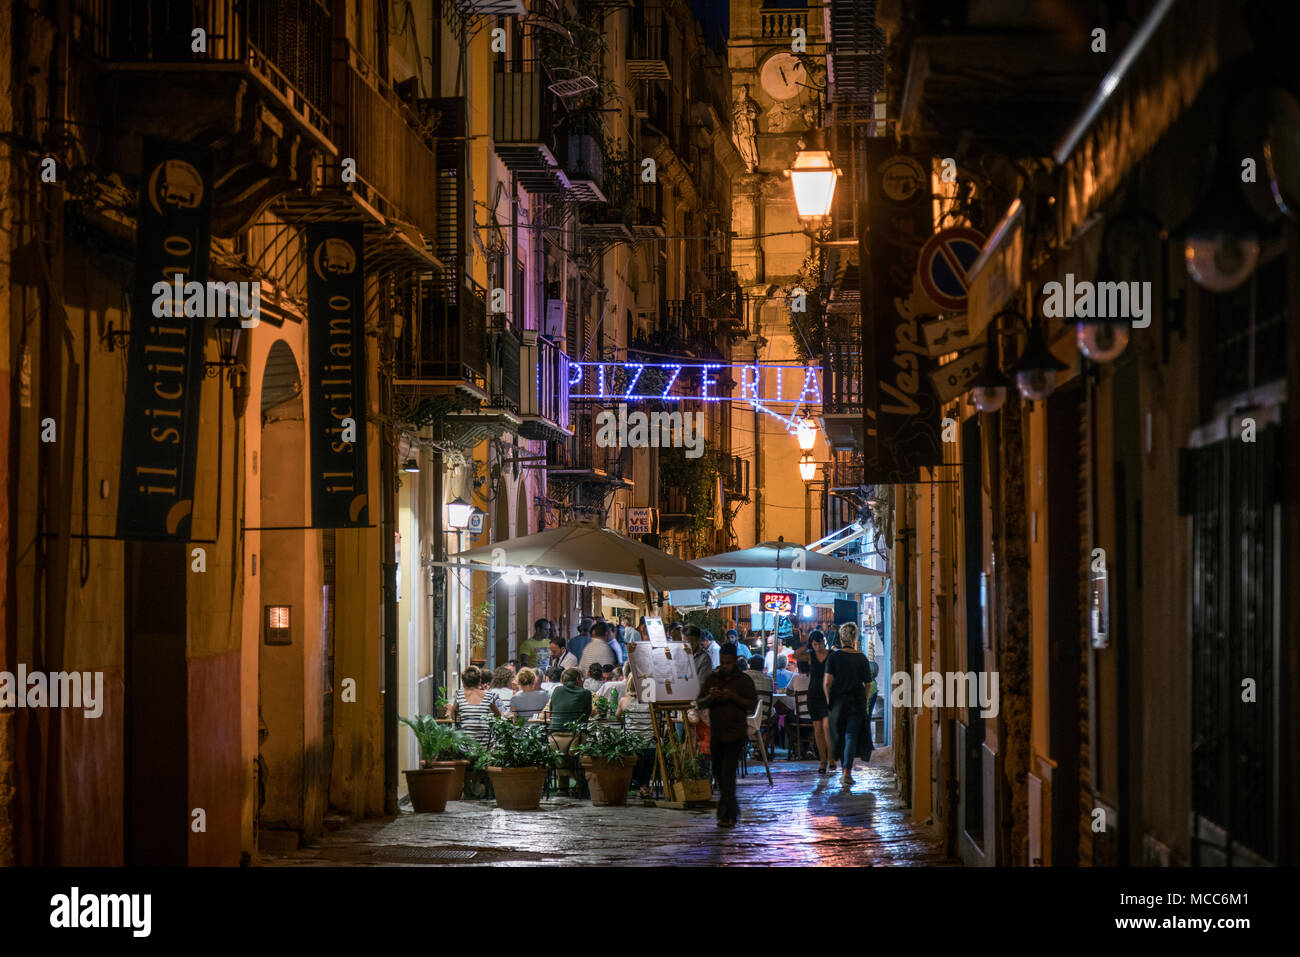 People sat outside eating at a Pizzeria in Palermo, Sicily, Italy, at night in summer. Stock Photo